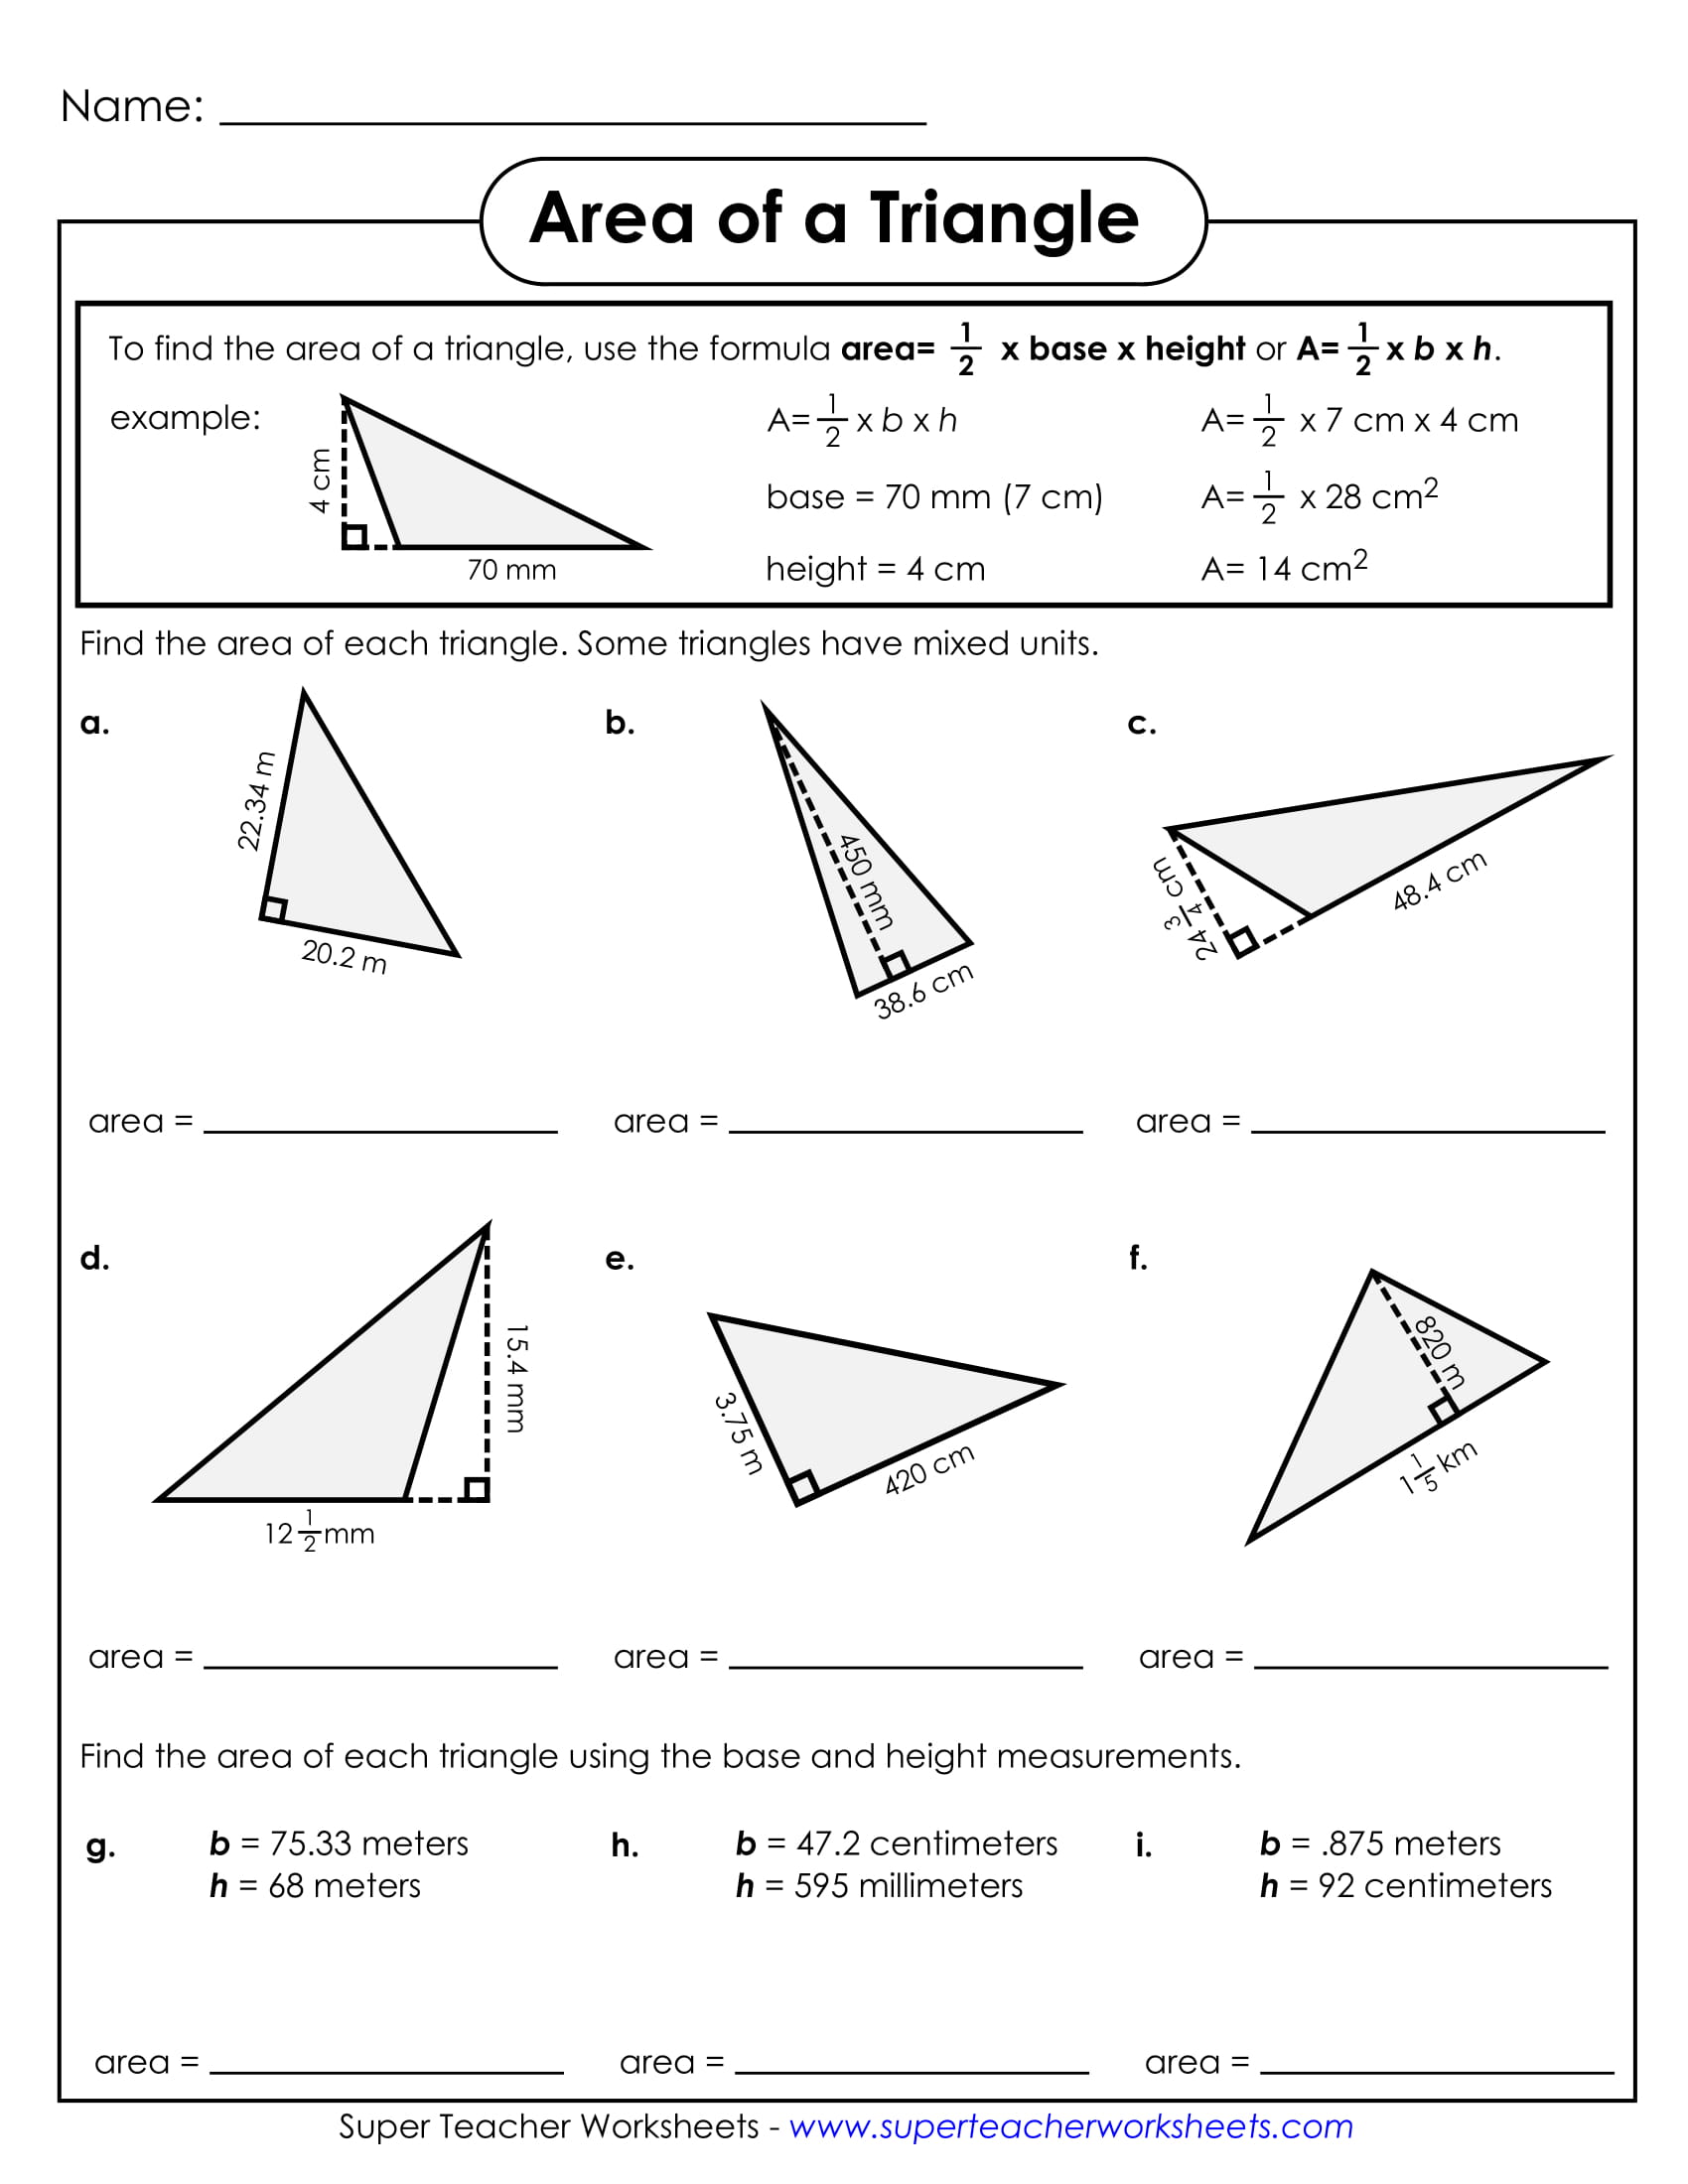 20+ Geometry Worksheet Examples for Students - PDF  Examples In Area Of Triangles Worksheet Pdf